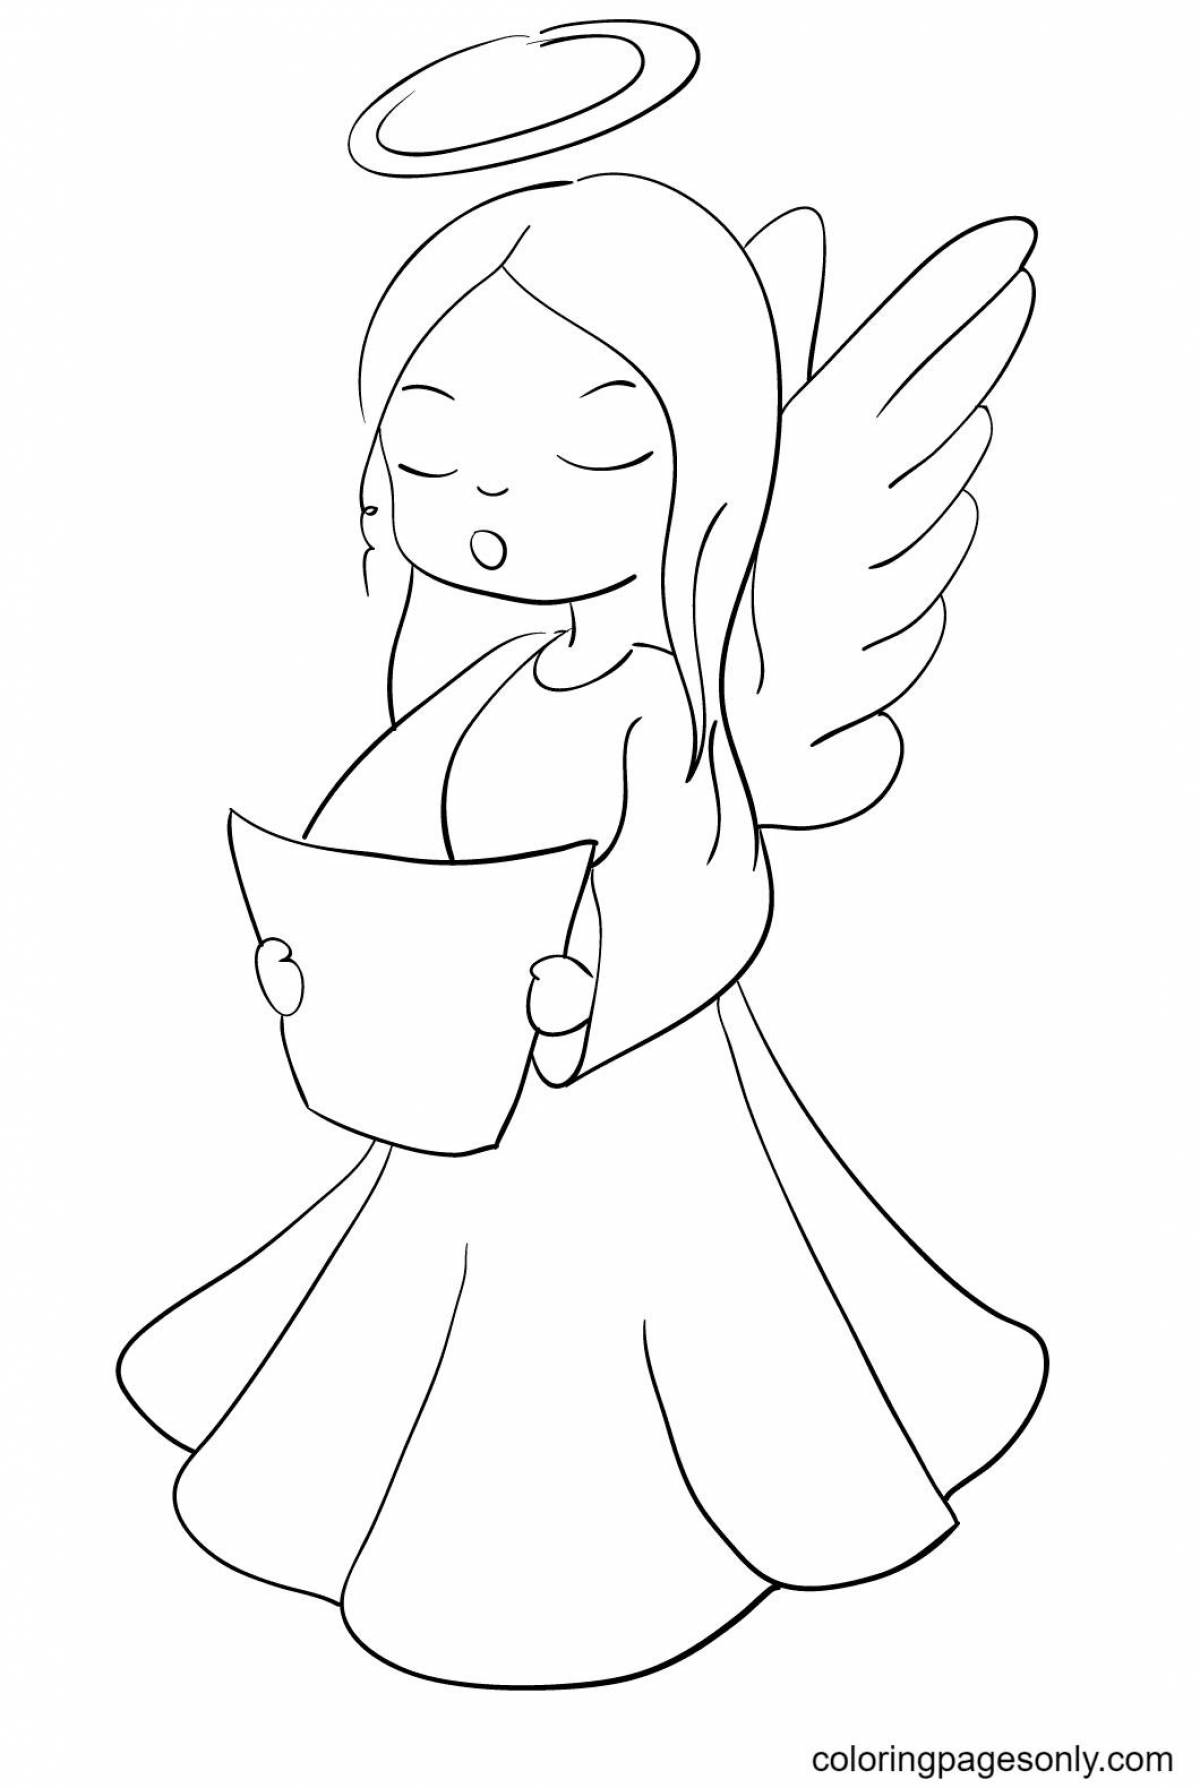 Generous Christmas angel coloring page